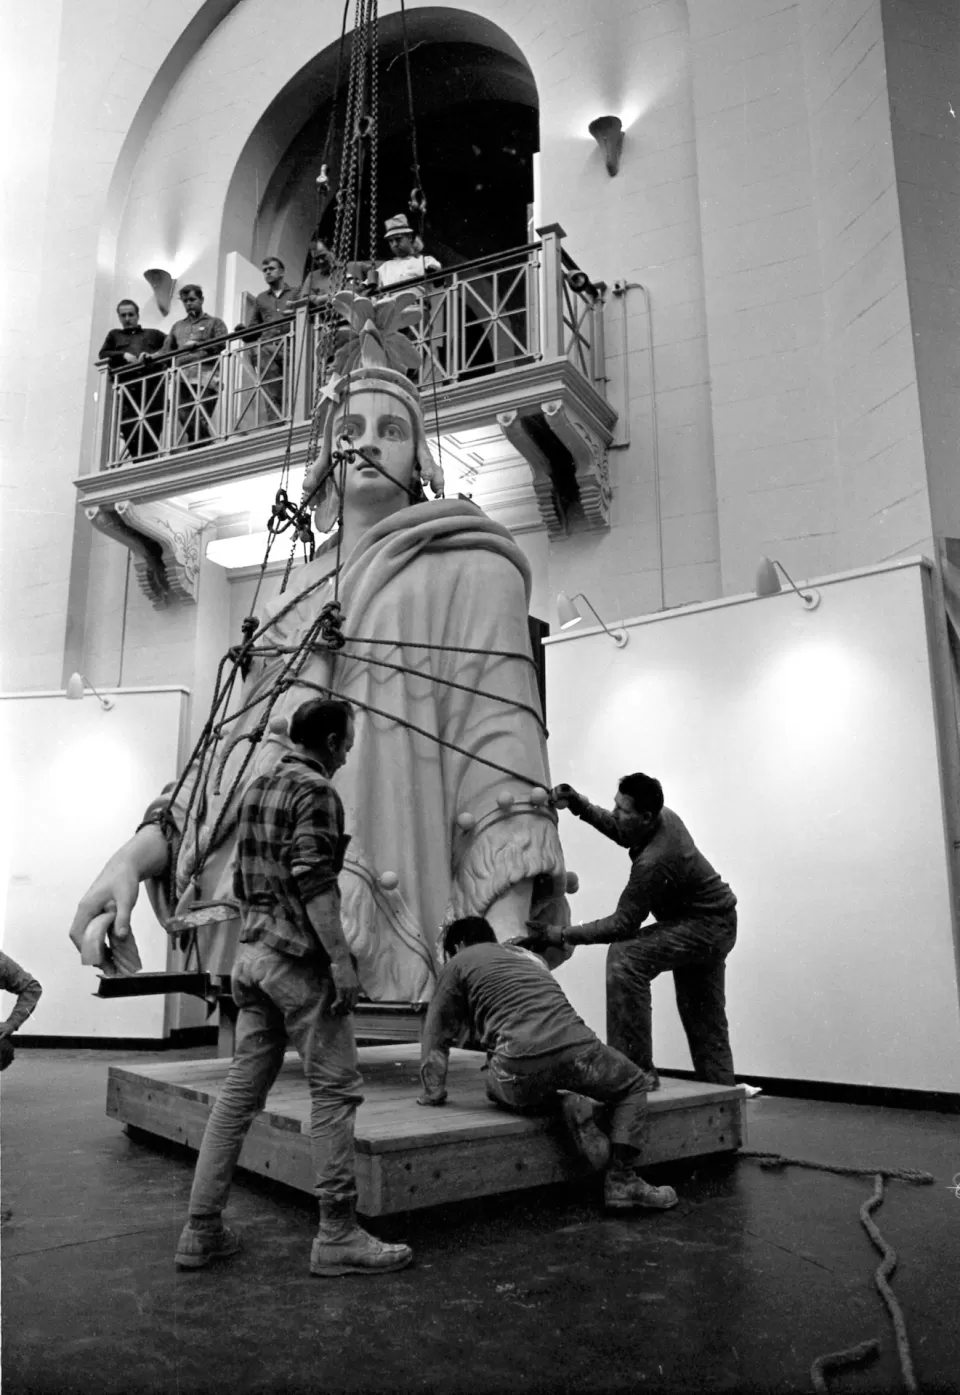 Statue being moved with people on balcony above.